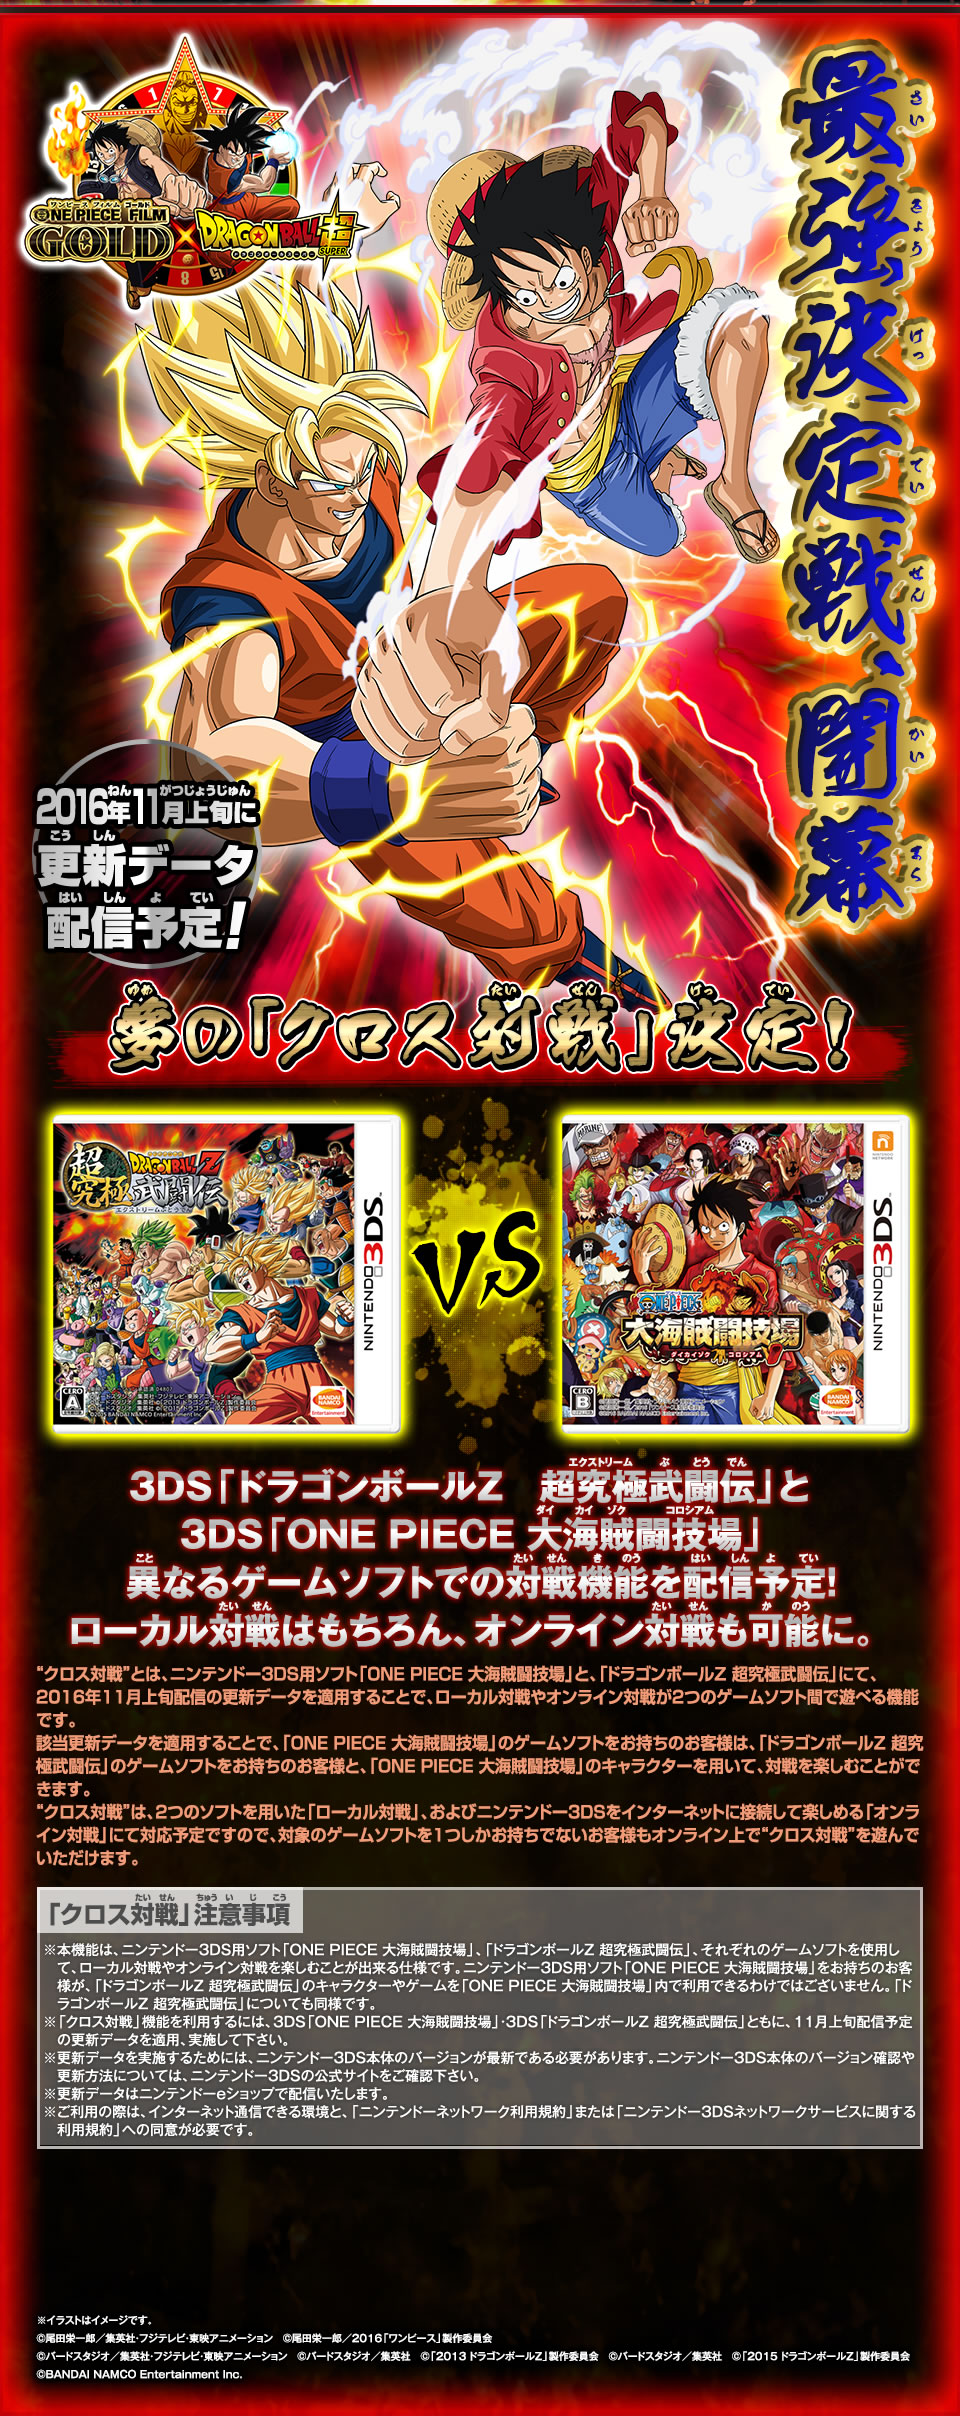 News Dragon Ball Z Extreme Butōden One Piece Great Pirate Colosseum Cross Game Battle Support Announced